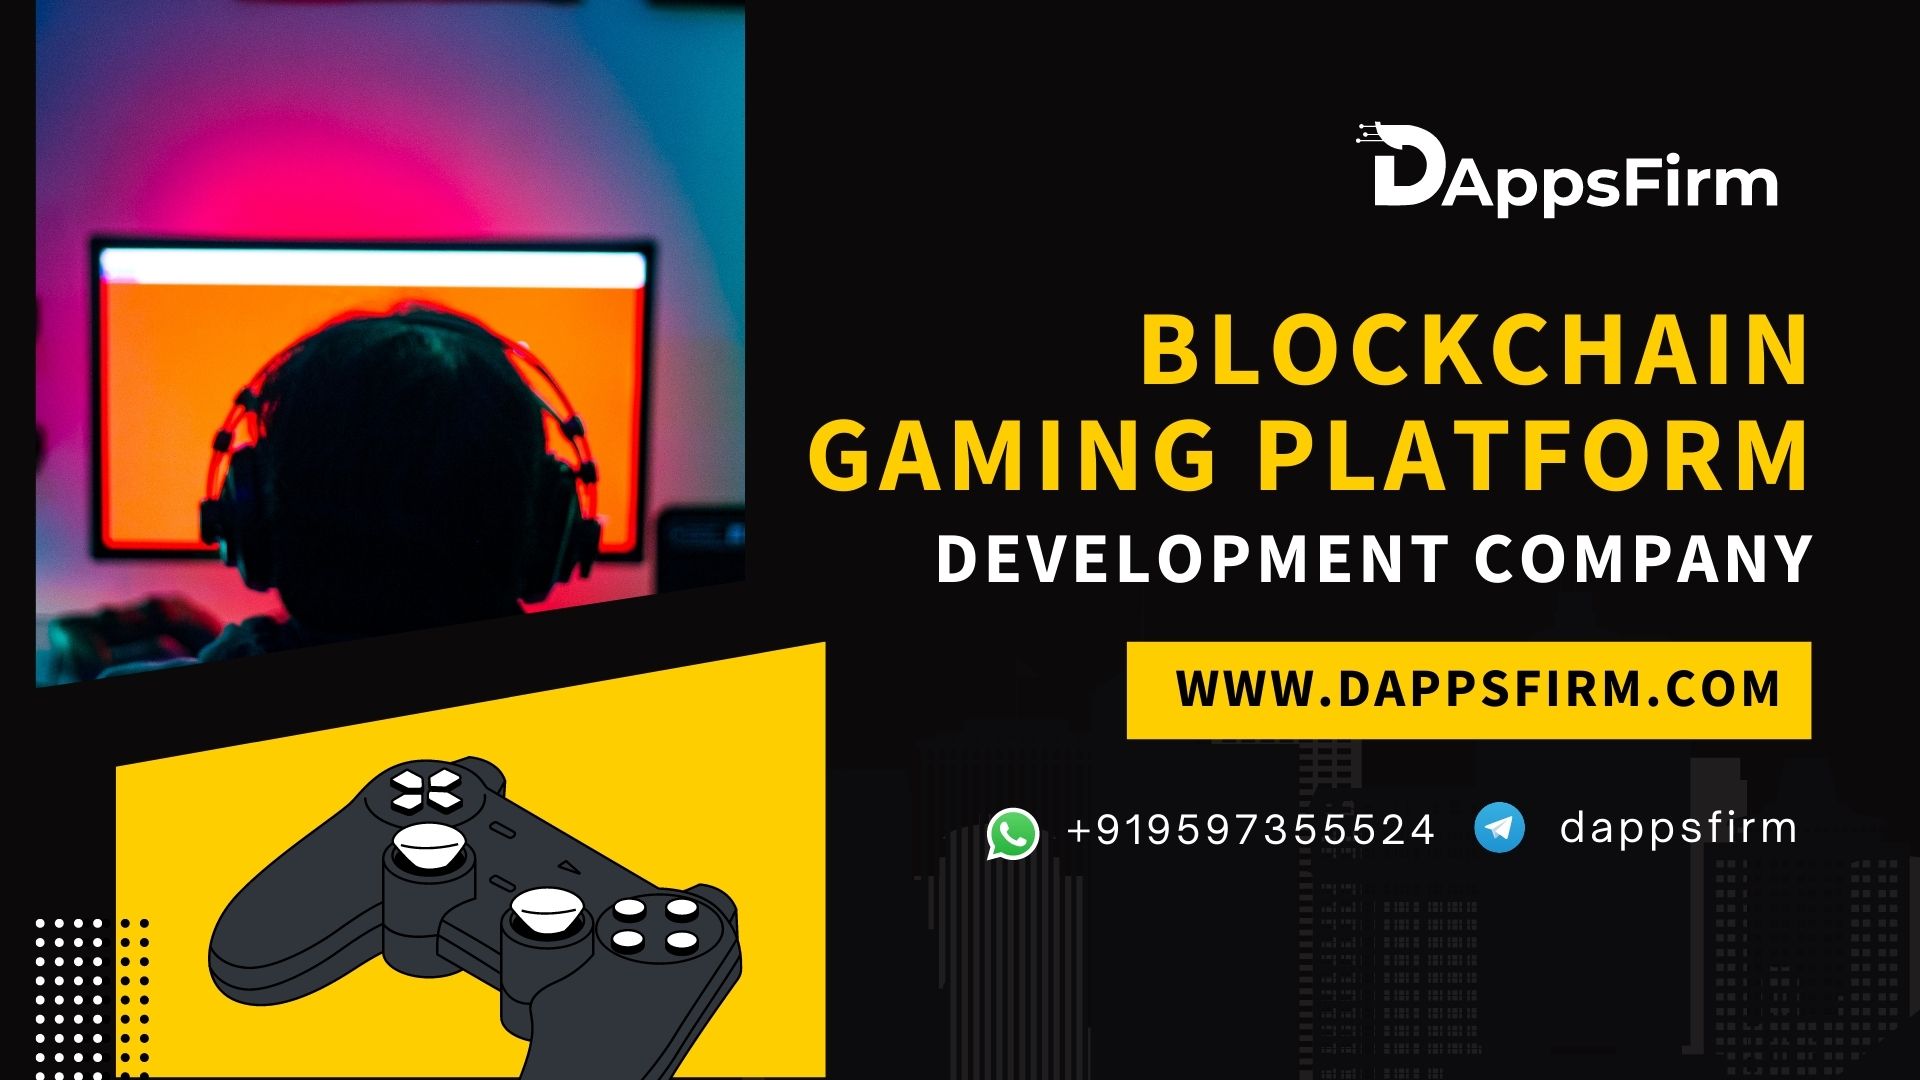 Article about Rely On Dappsfirm For world-class Blockchain Gaming Platform Development